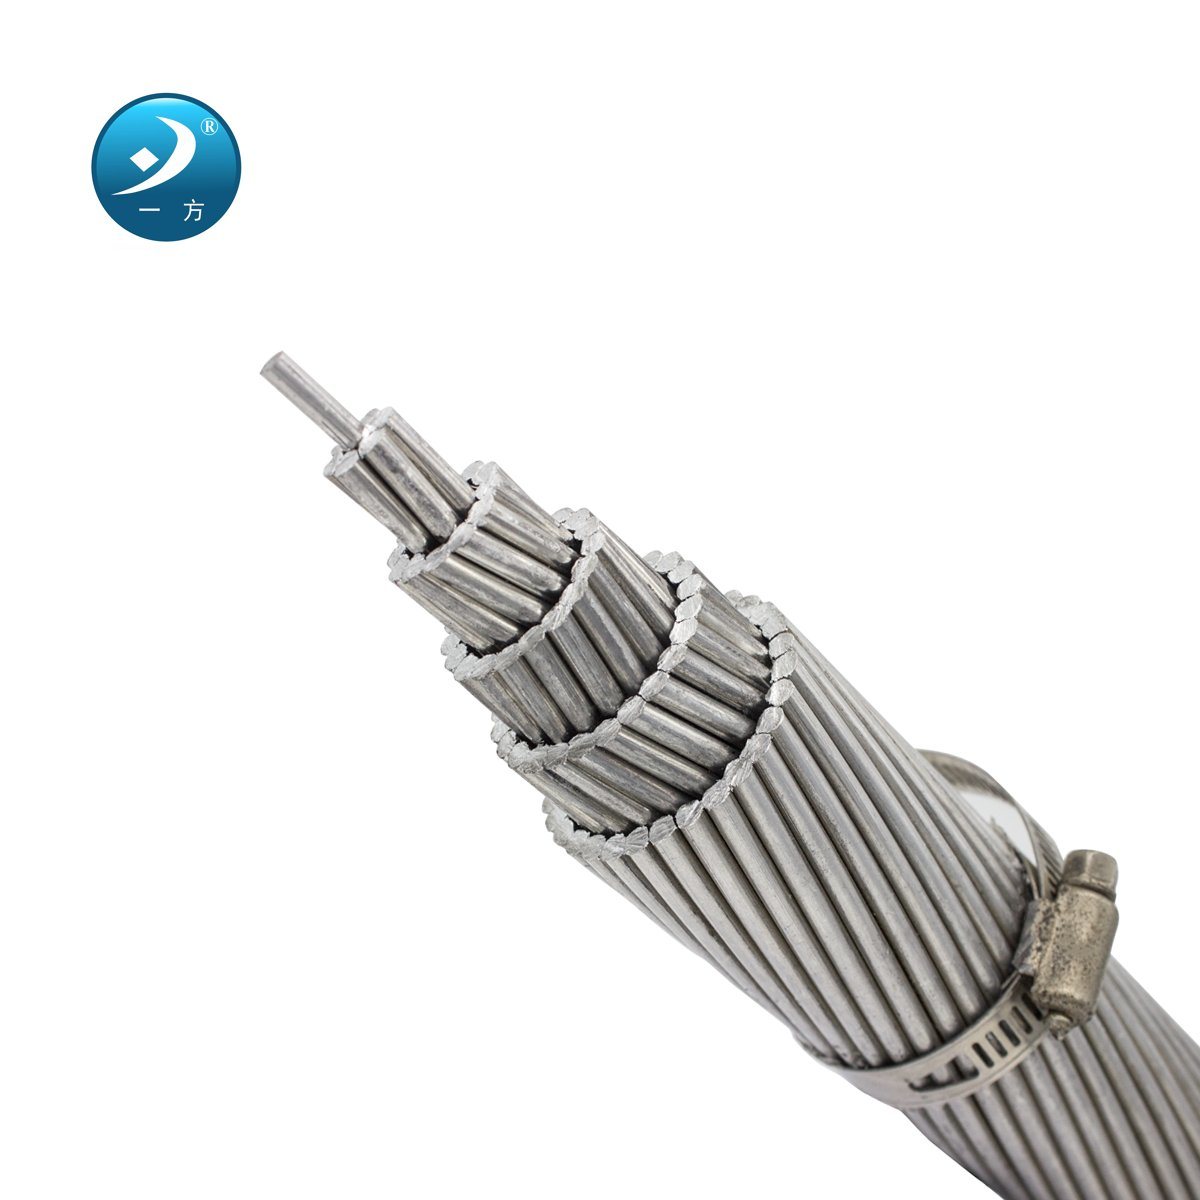 Bare AAAC Conductor Aluminum Alloy Stranded Conductor Service Drop Wire1250mm2 ASTM IEC Overhead Cable Size